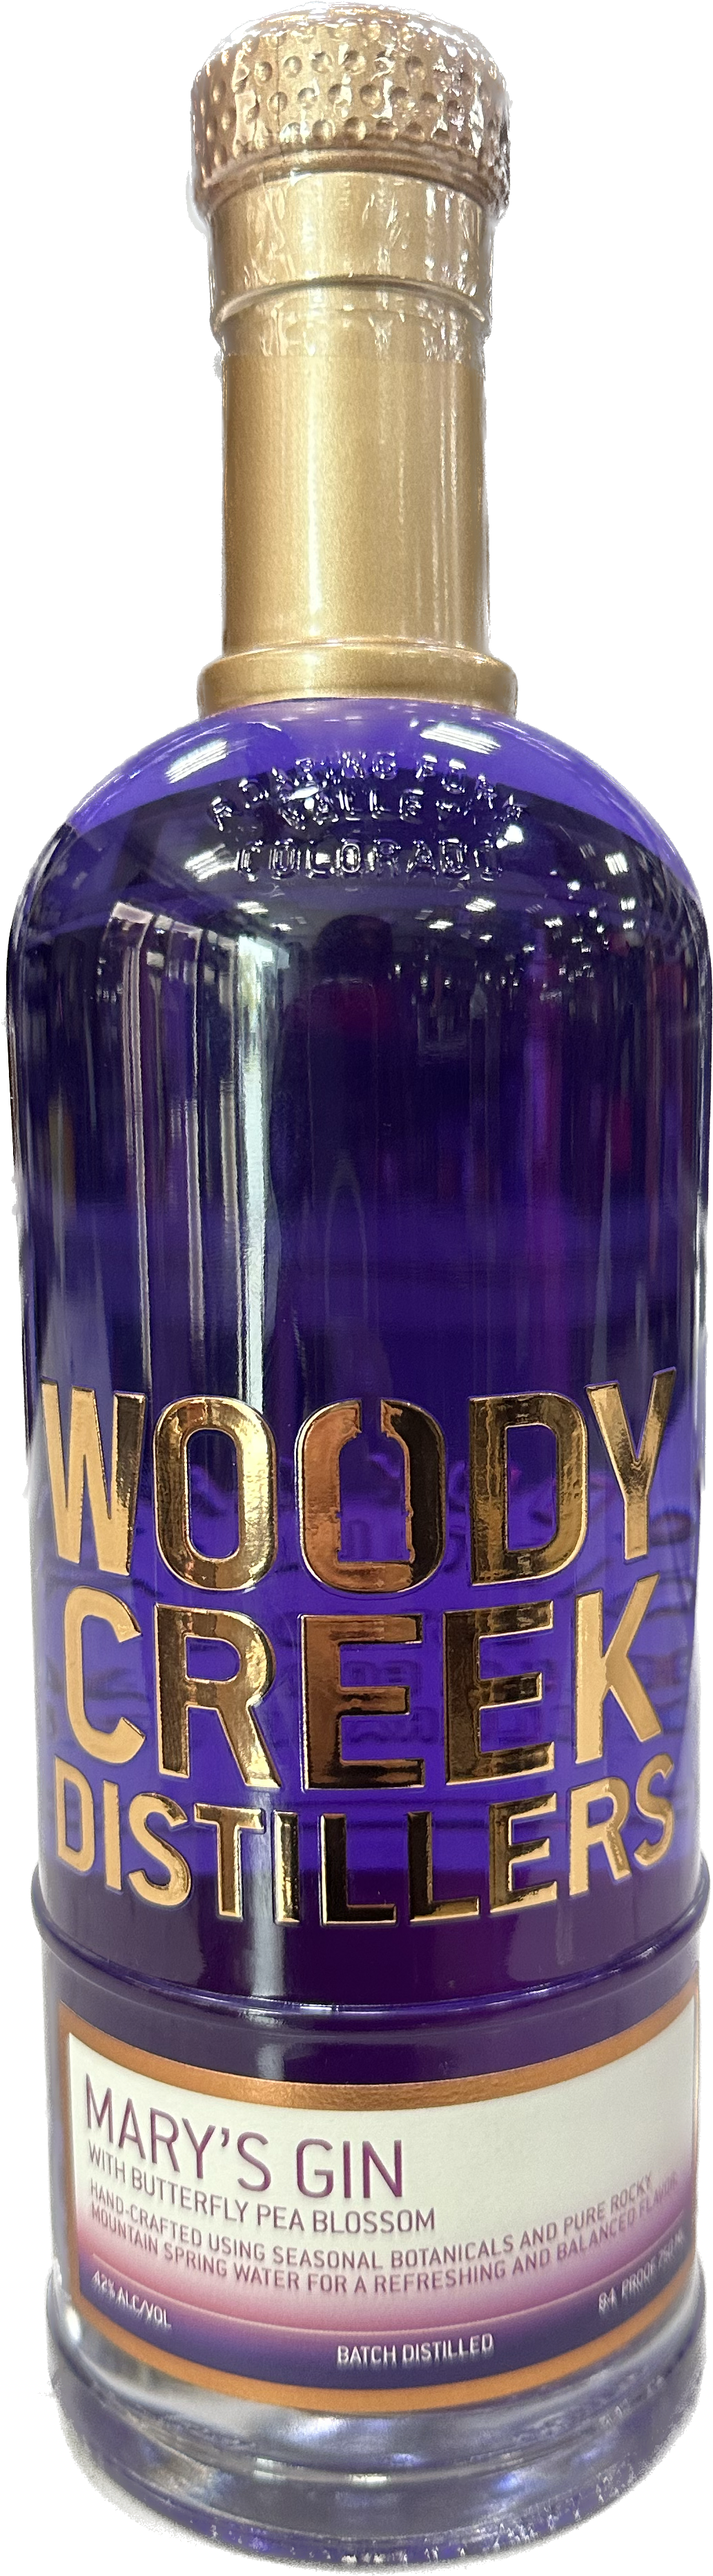 WILLIAM H MACY WOODY CREEK DISTILLERS GIN LIMITED EDITION SEASONAL SUMMER COLORDAO 750ML